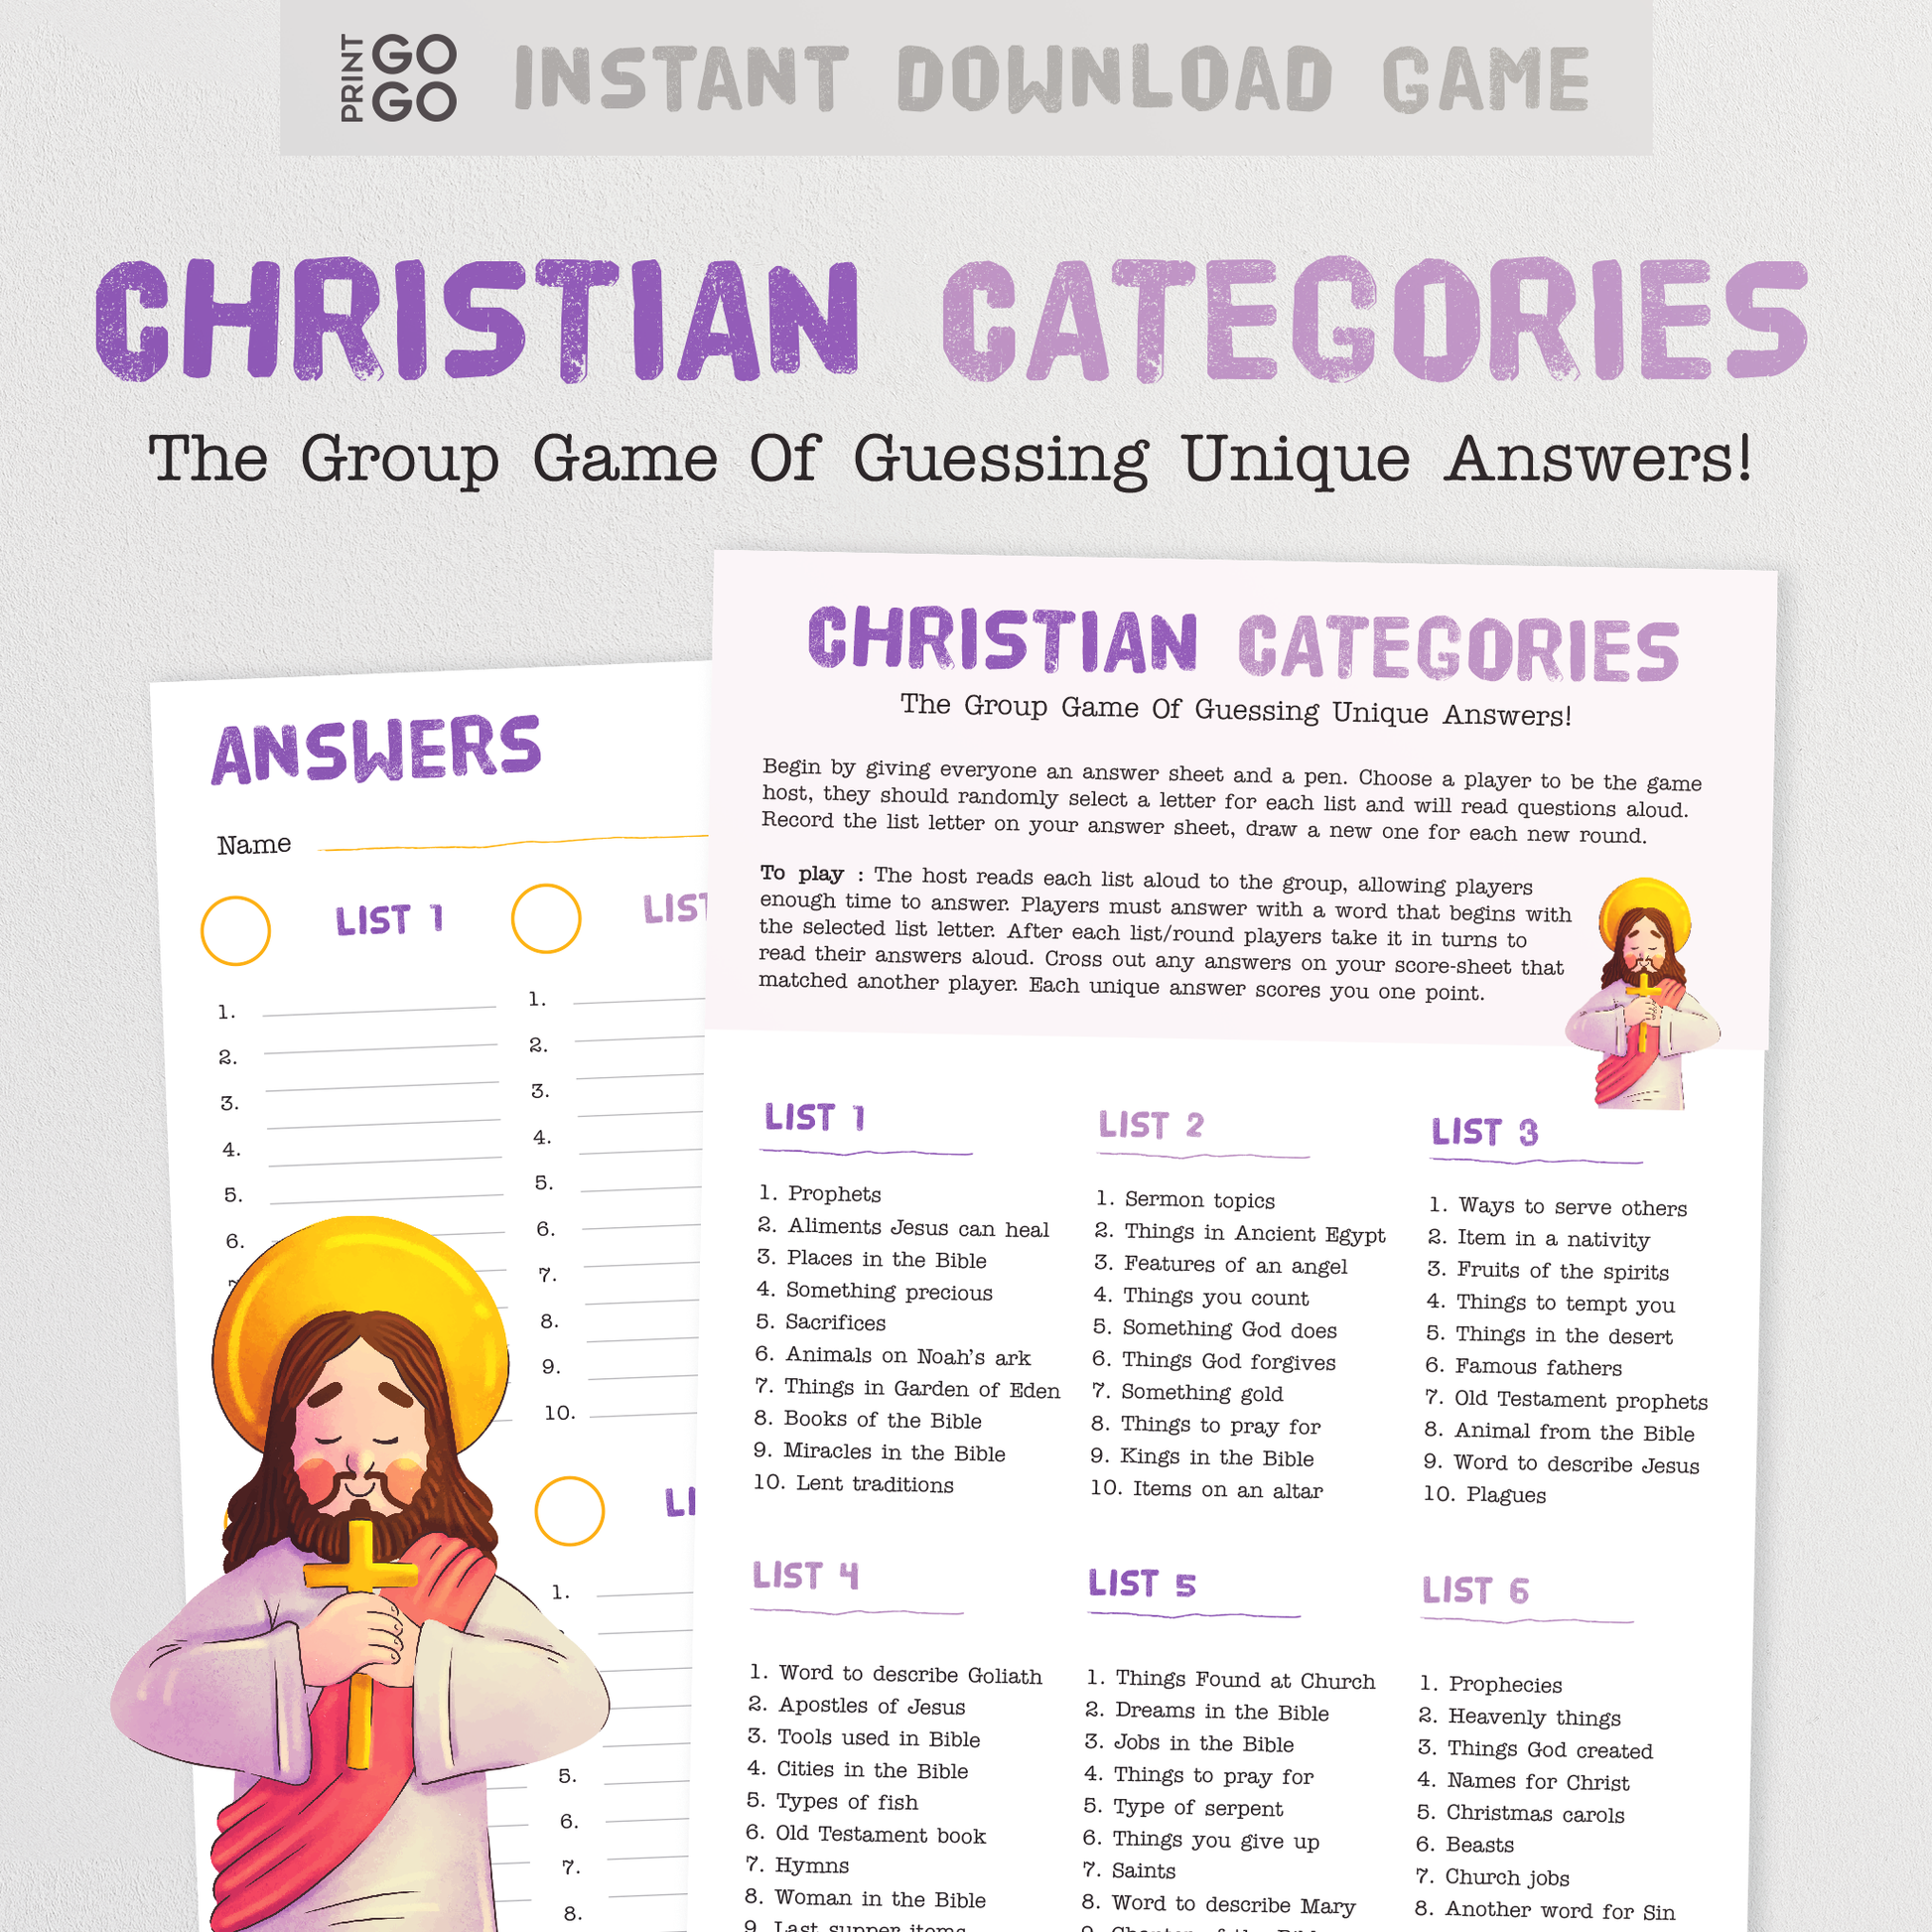 Christian Categories - The Group Game Of Guessing Unique Answers!